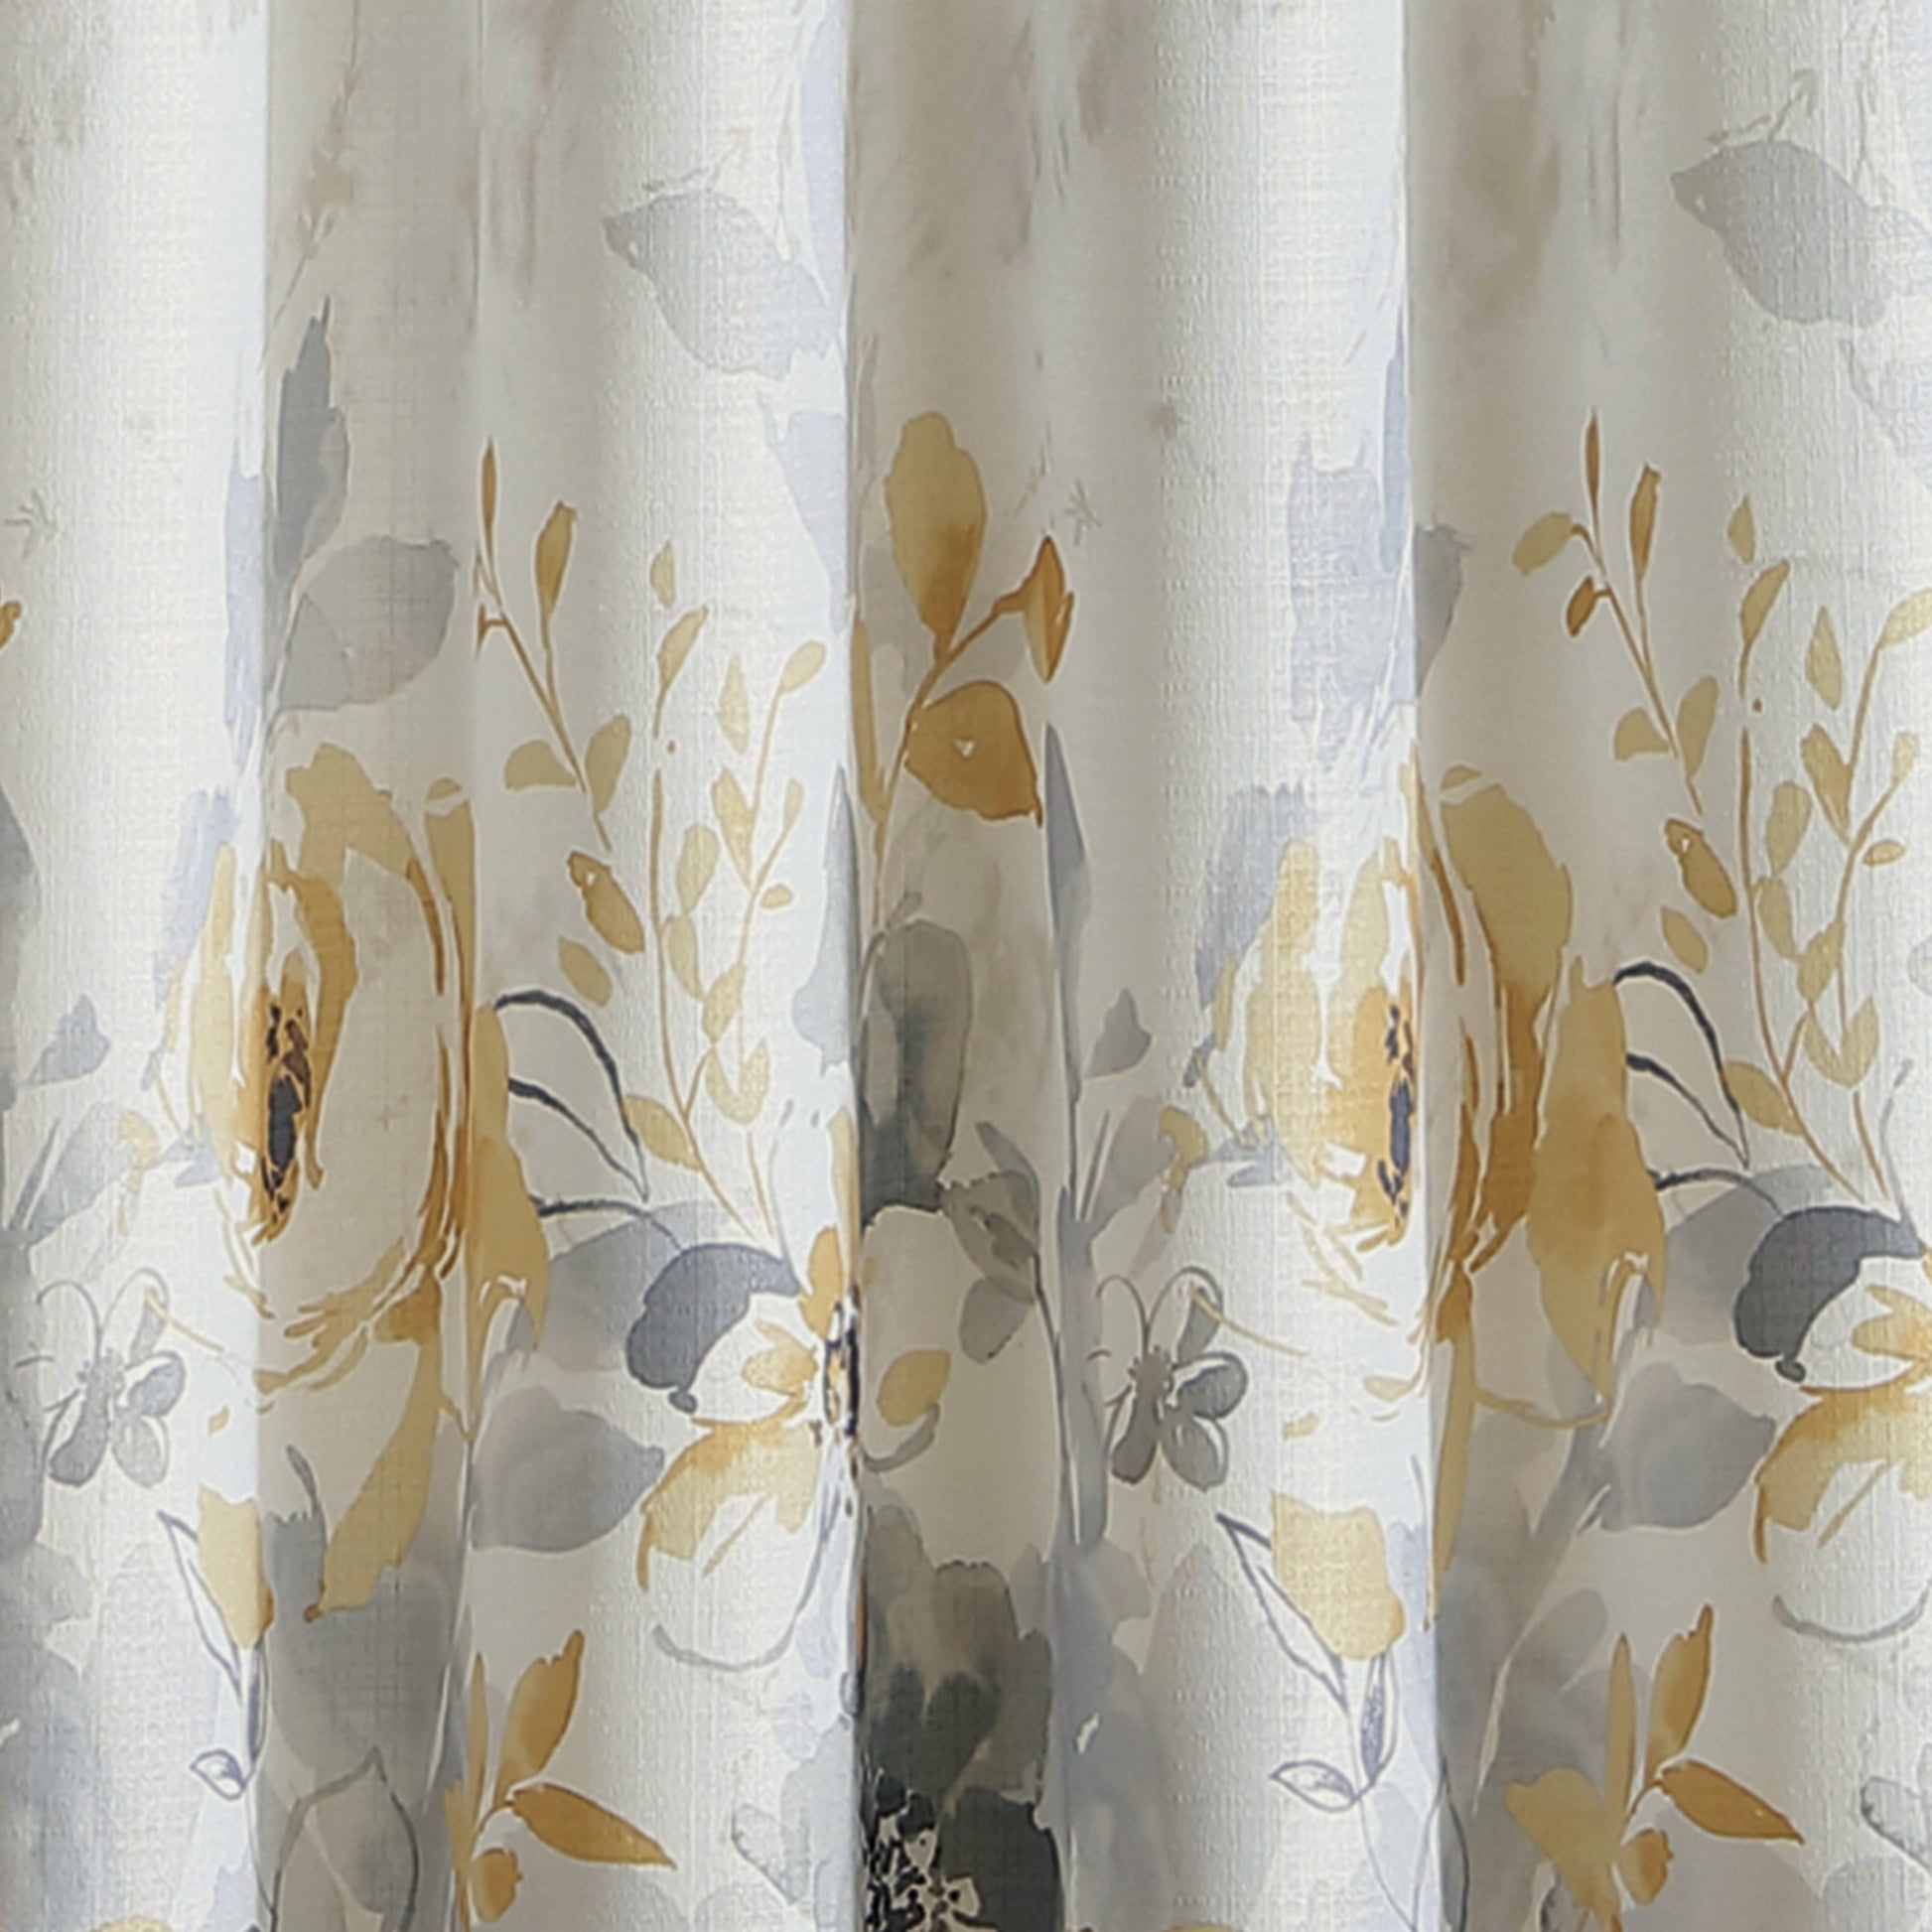 Watercolor Floral Poletop Window Curtain Panel Gold